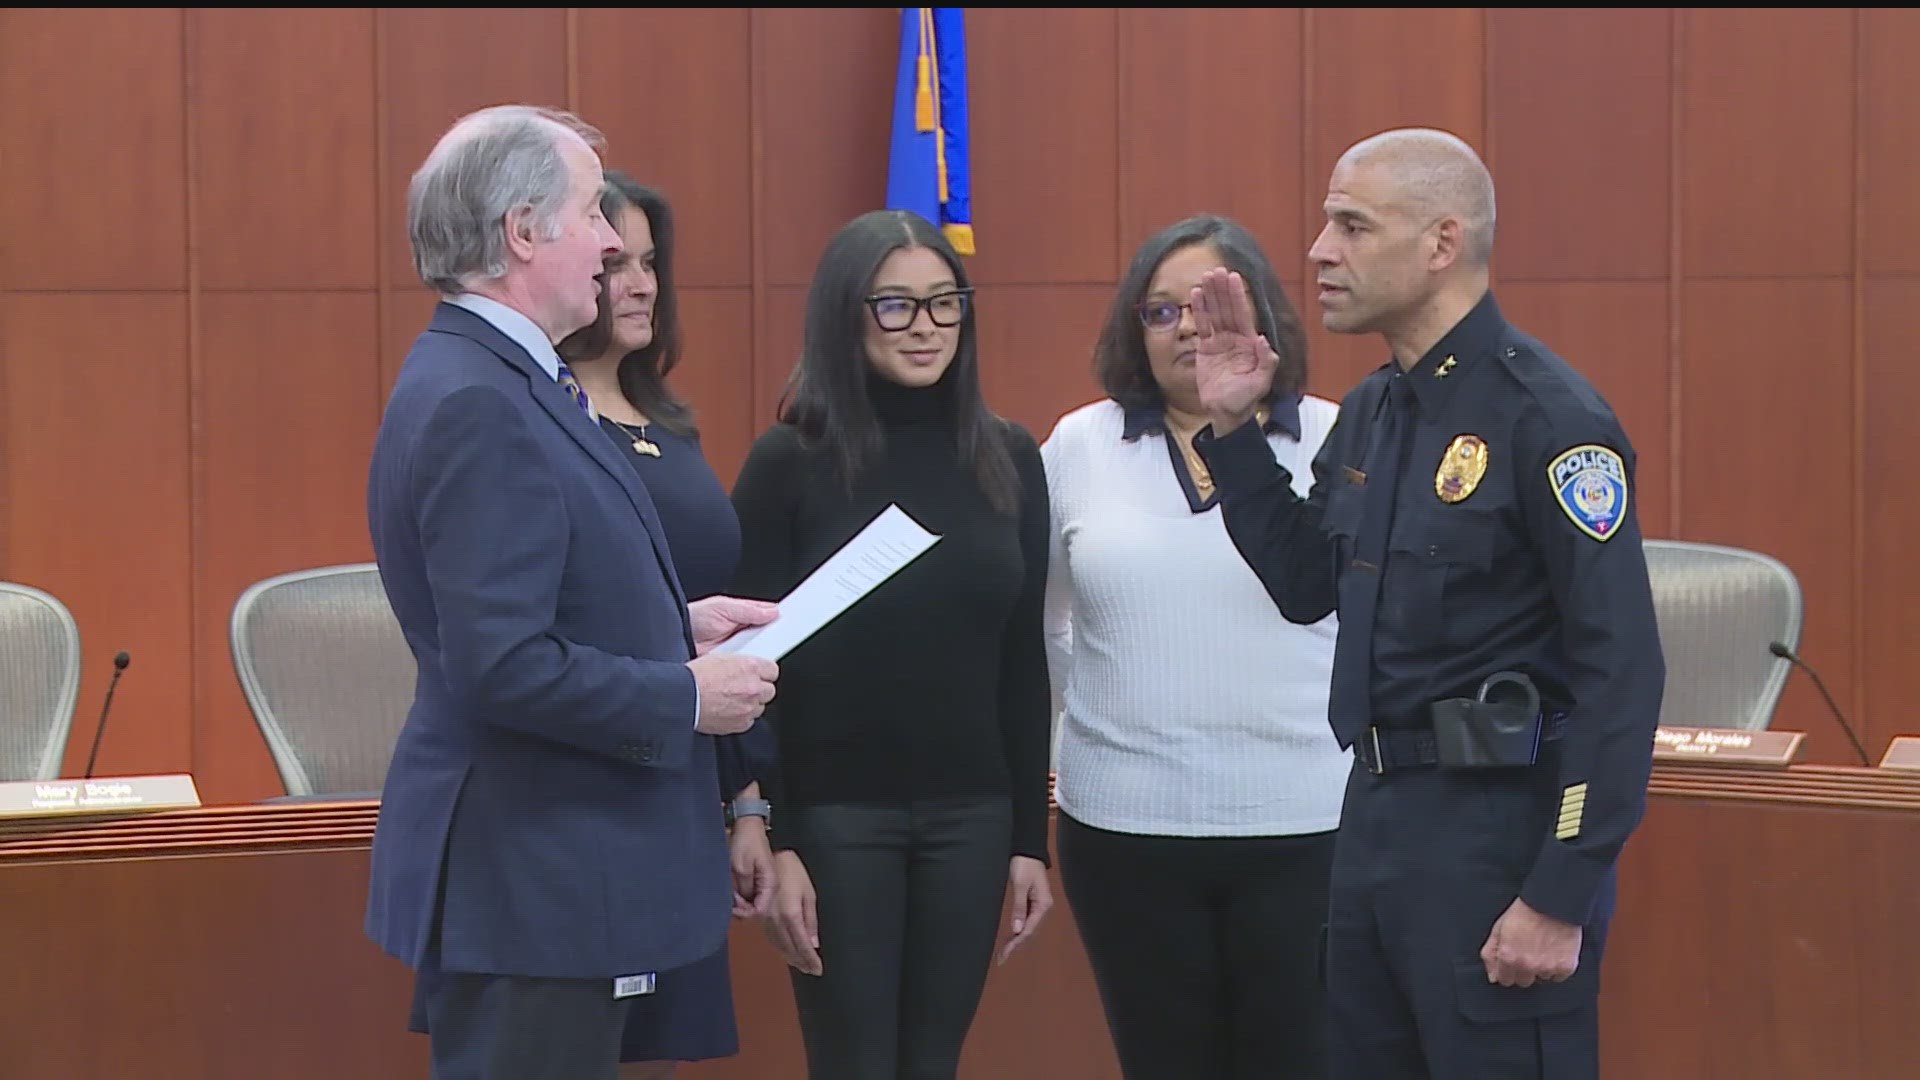 Ernest Morales III joins the Metro Transit Police Department after spending most of his career with the New York City Police Department.